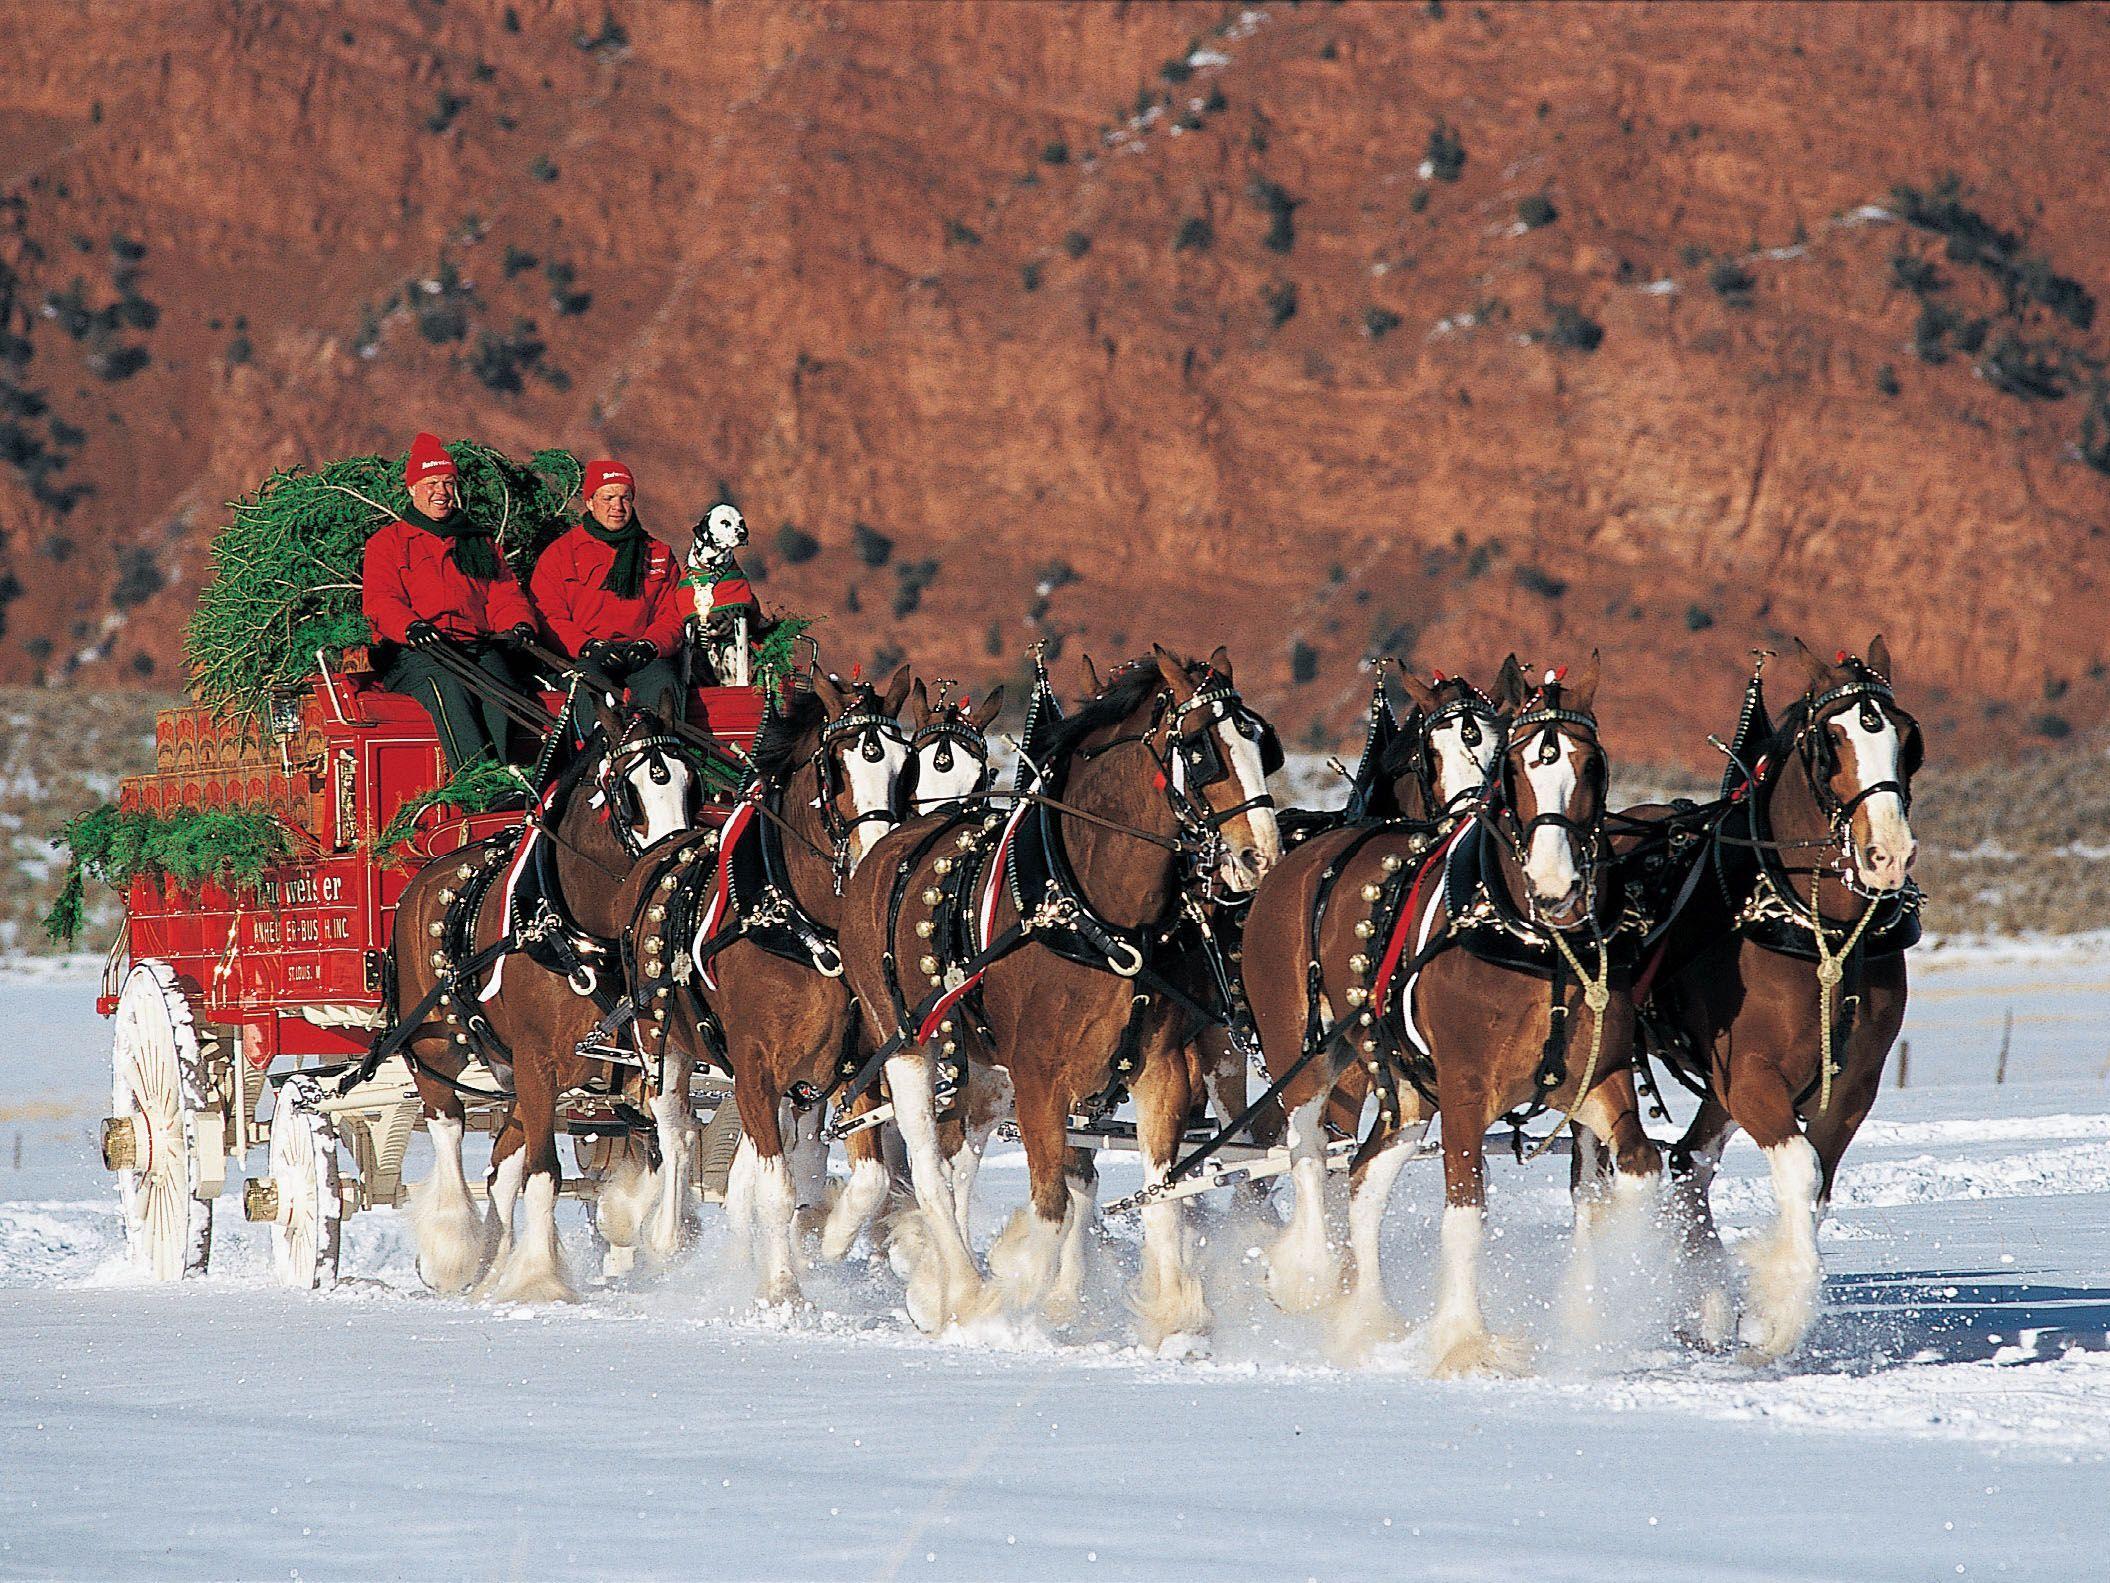 Budweiser Clydesdales Christmas Wallpaper. Budweiser Clydesdales